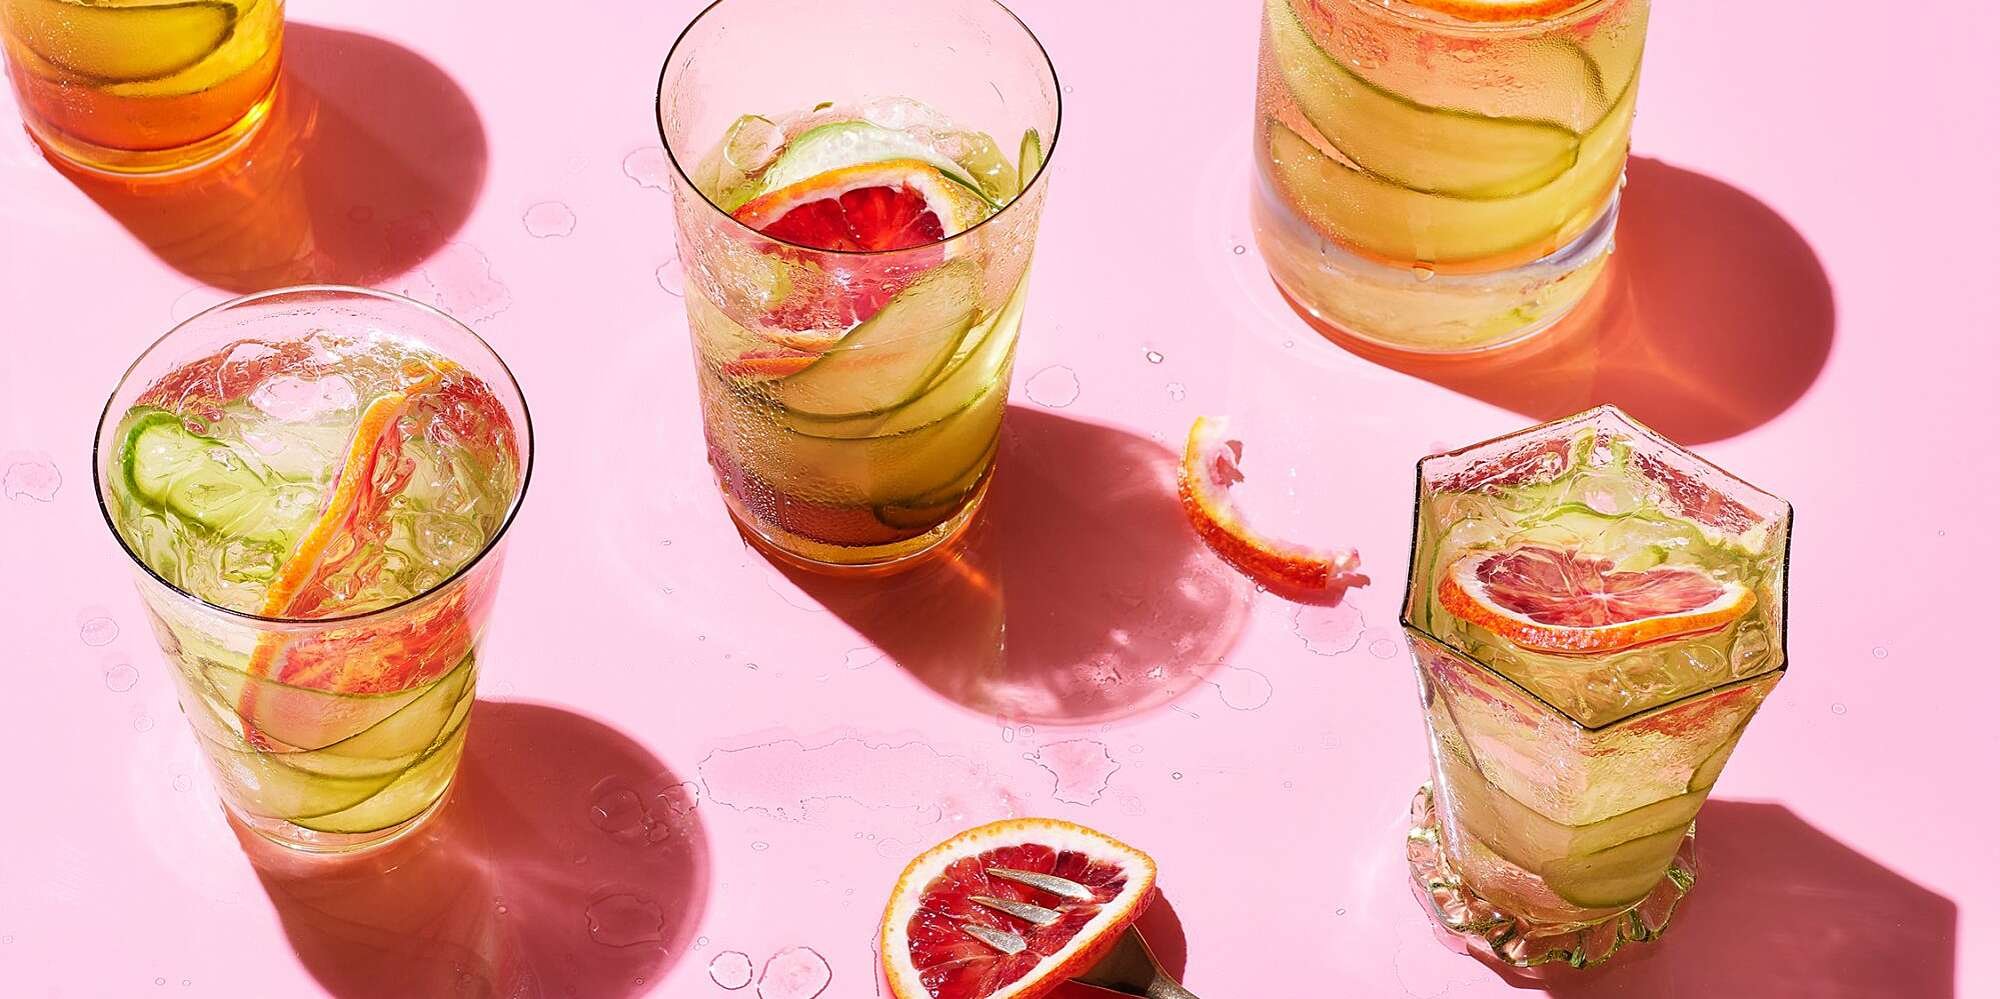 The Best Summer Cocktails for a Healthy-ish Beverage